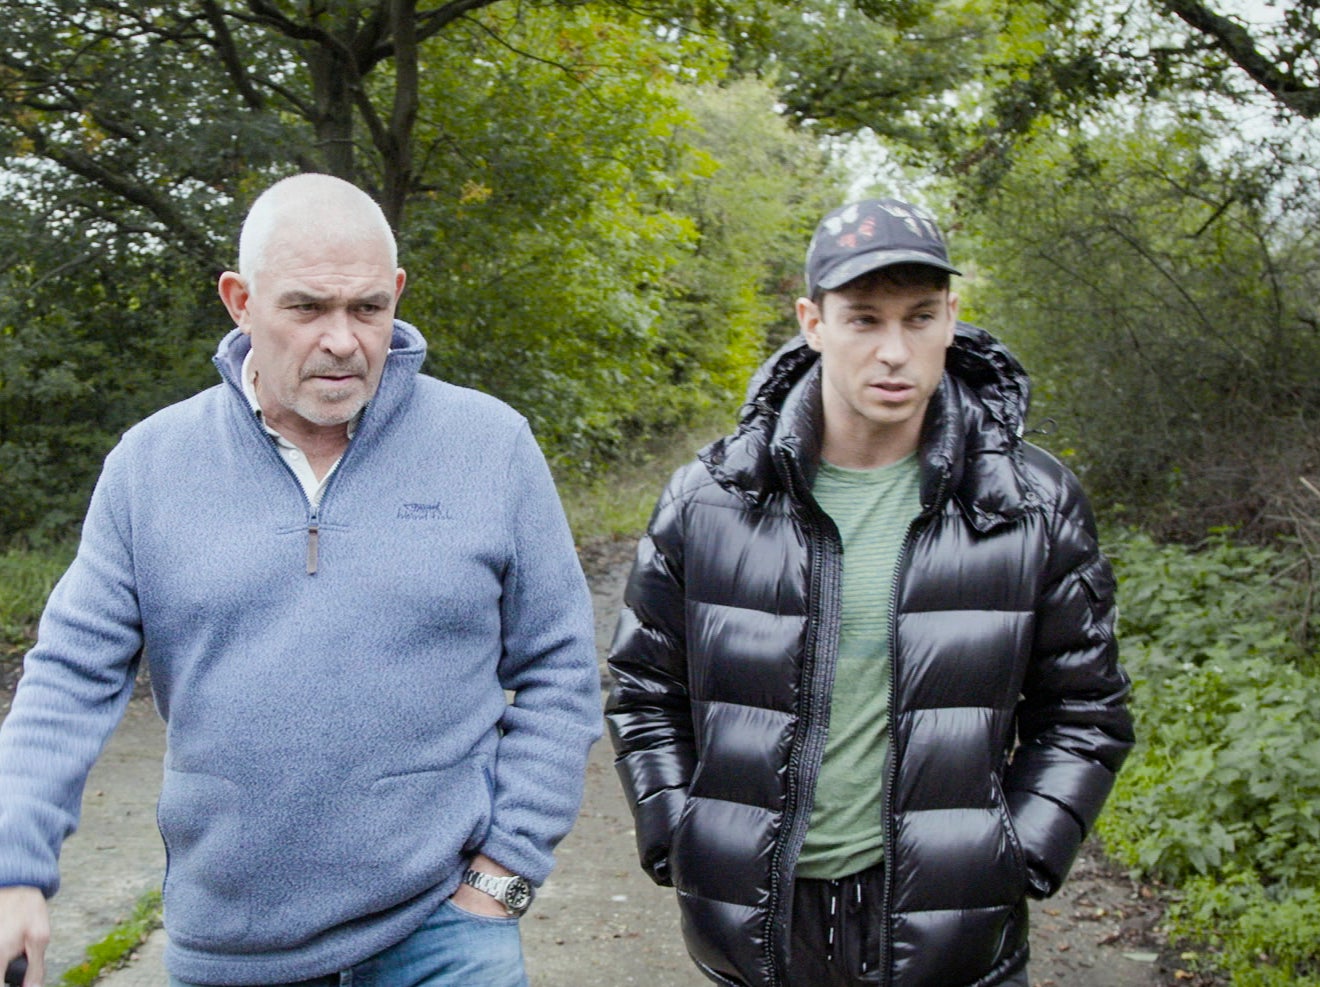 Joey and his dad, Don, walking near his home in Essex and talking about therapy